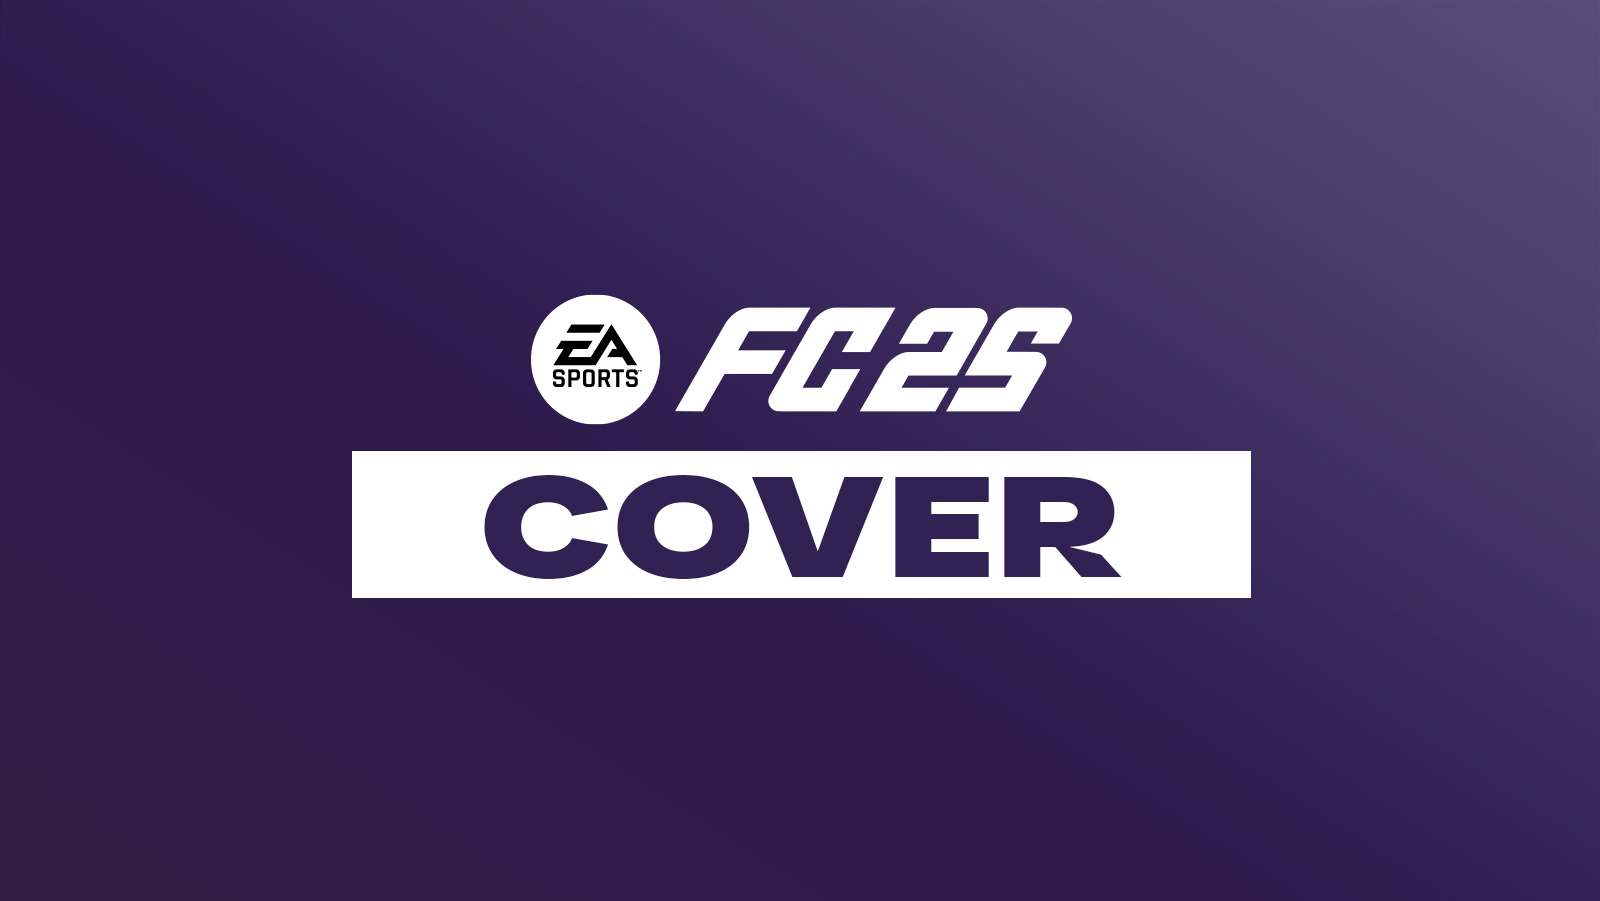 EA Sports Football Club 25 cover star and cover shots.